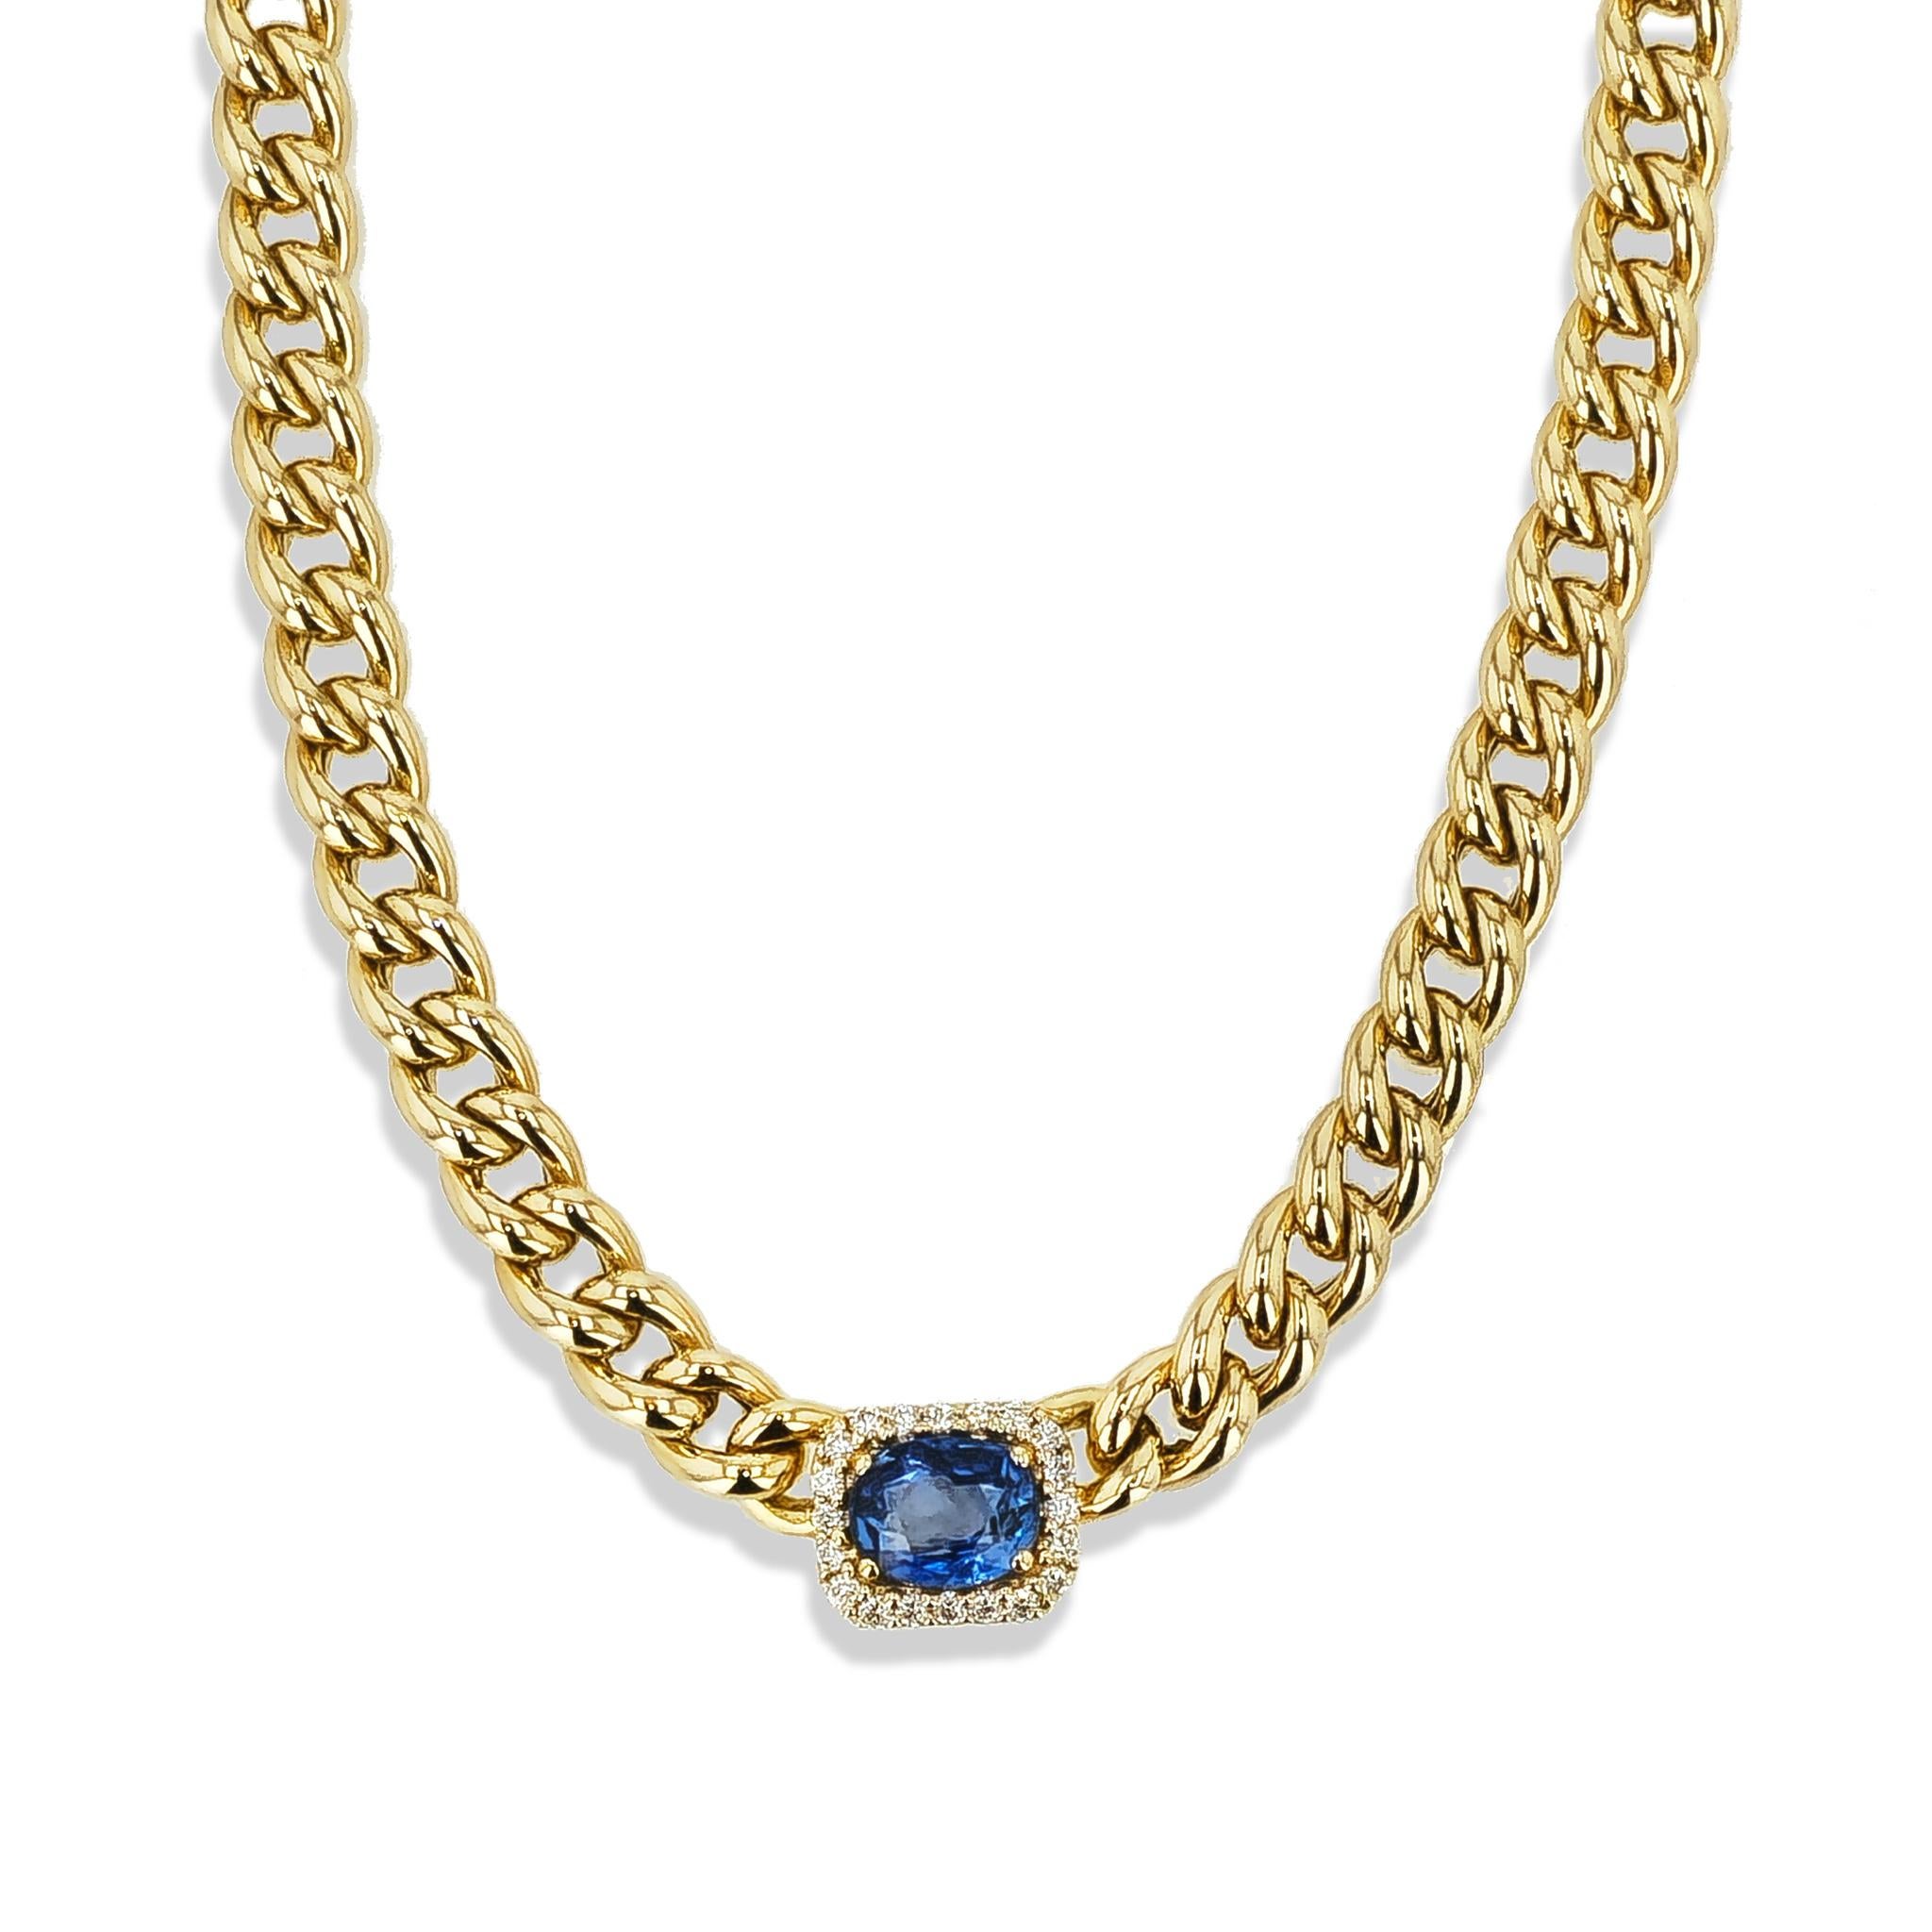 Experience impeccable luxury with this 18 karat yellow gold necklace, adorning a magnificent 1.63ct Oval Sapphire, beaming with 0.20ct F-VS Diamond Pave!

18 karat Yellow Gold

1.63ct Oval Sapphire 

0.20ct F-VS Diamond Pave

Necklace